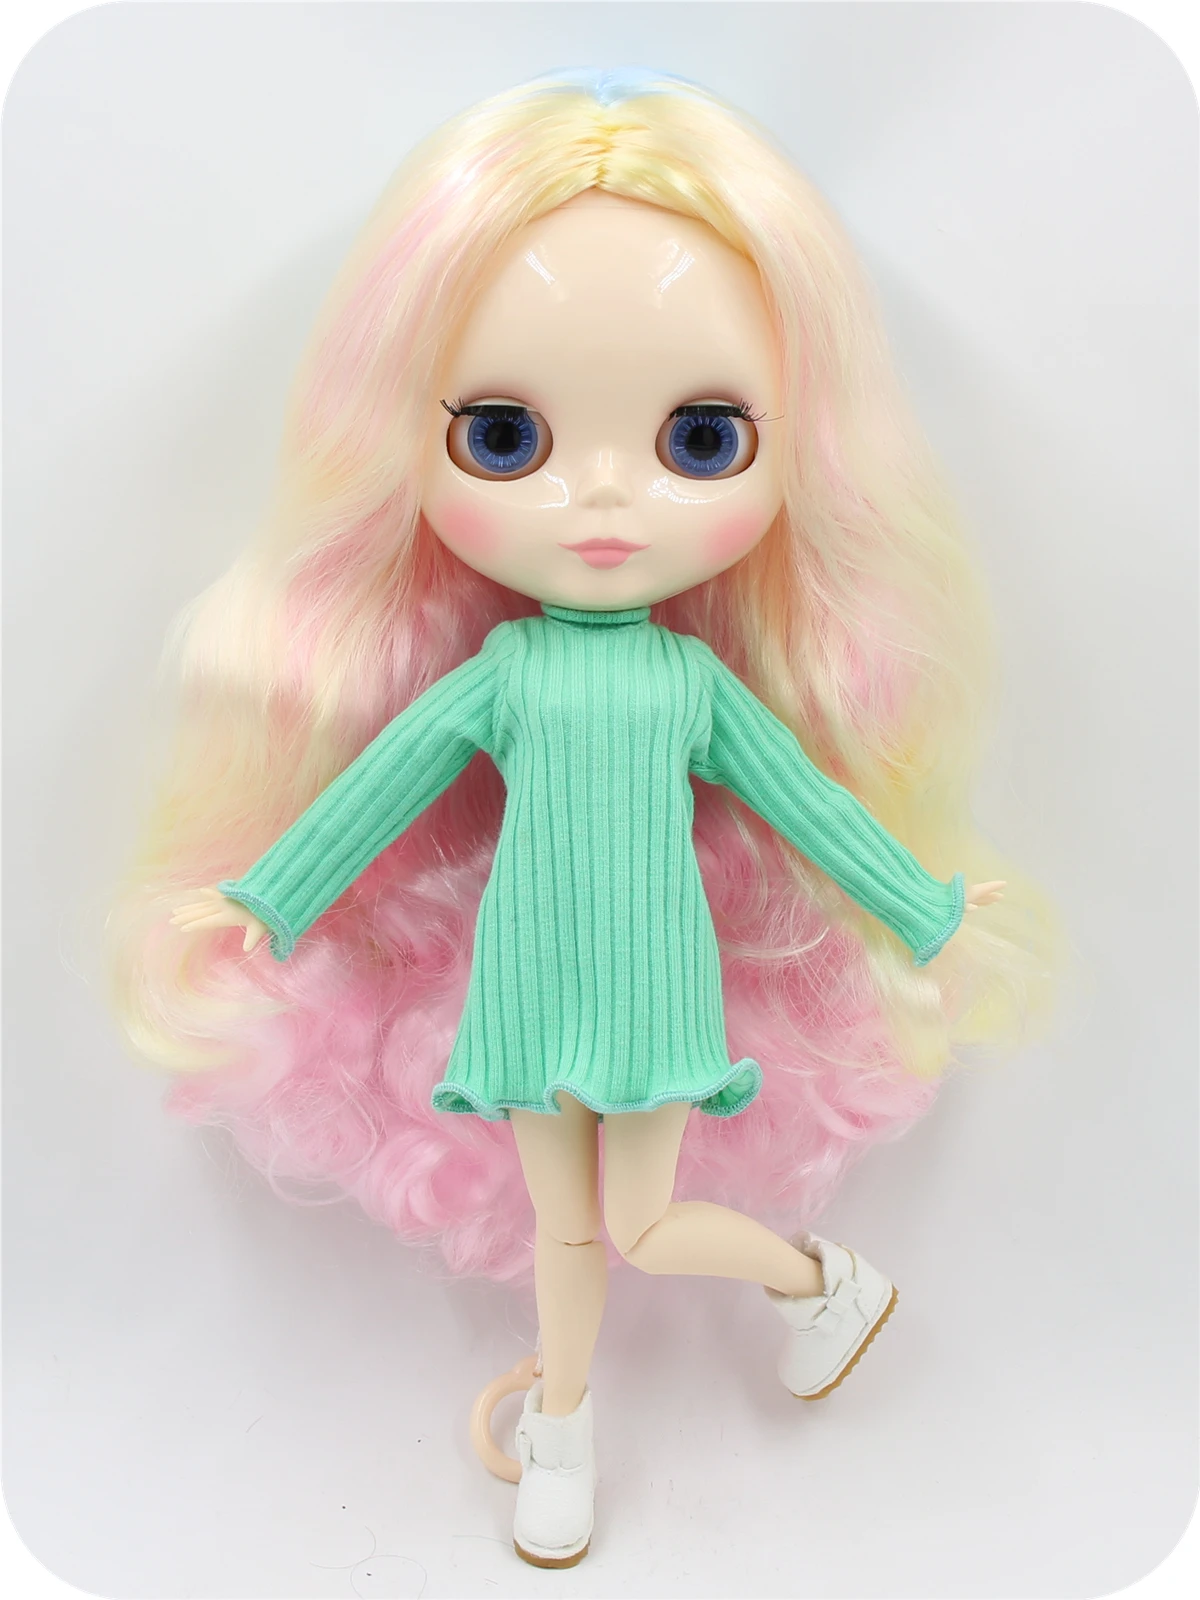 Neo Blythe Doll with Multi-Color Hair, White Skin, Shiny Cute Face & Factory Jointed Body 2